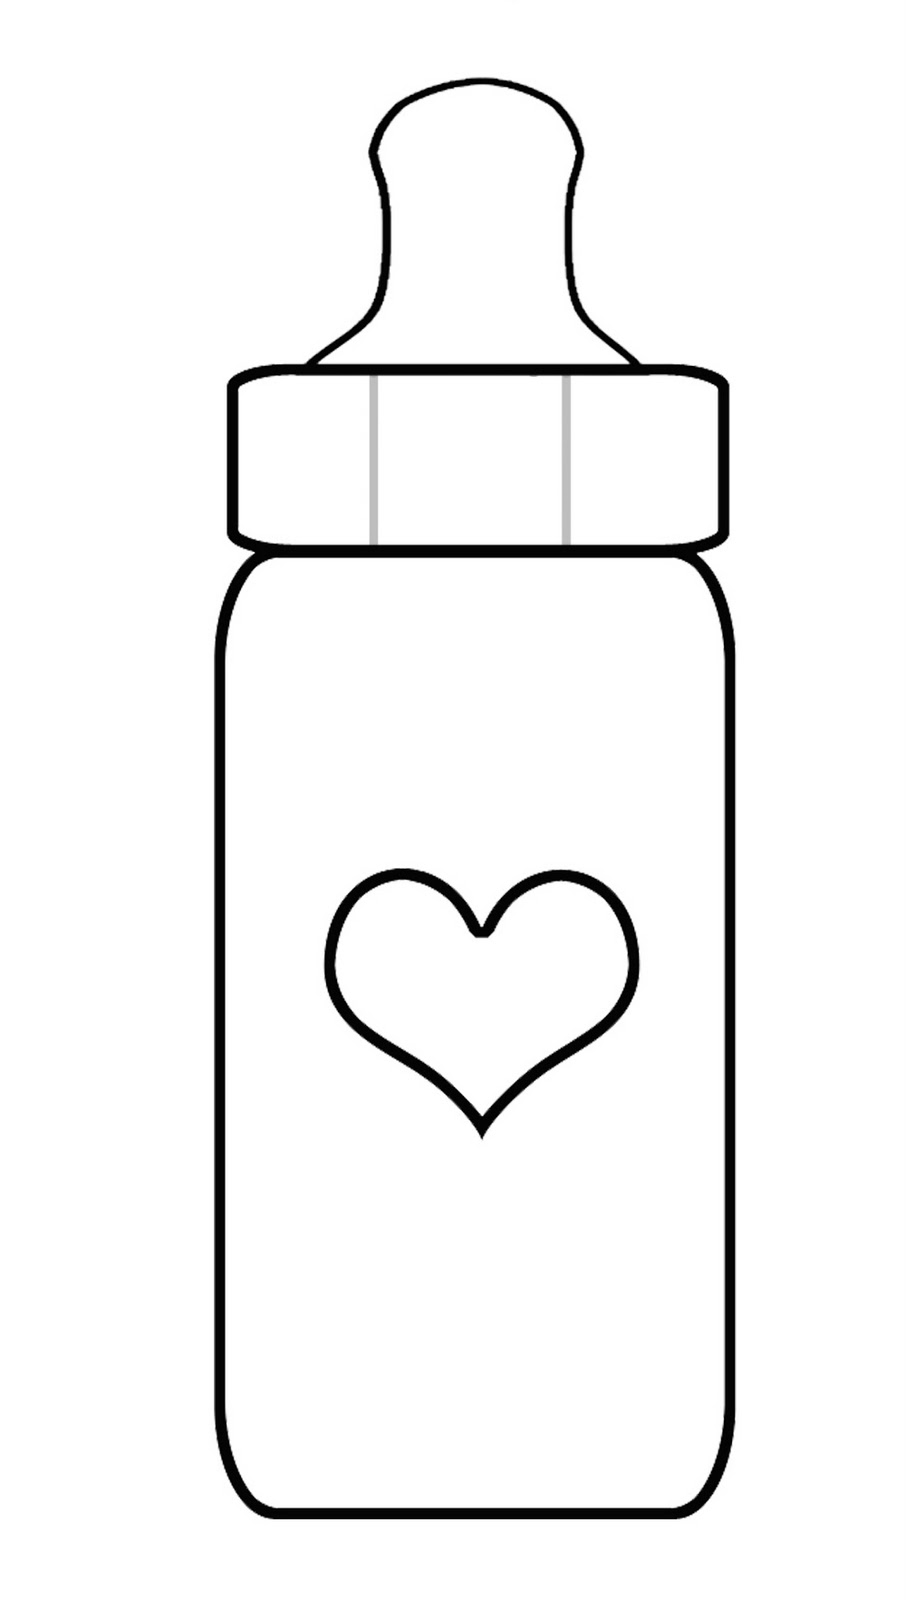 906x1600 Best s of Baby Bottle Outline Printables